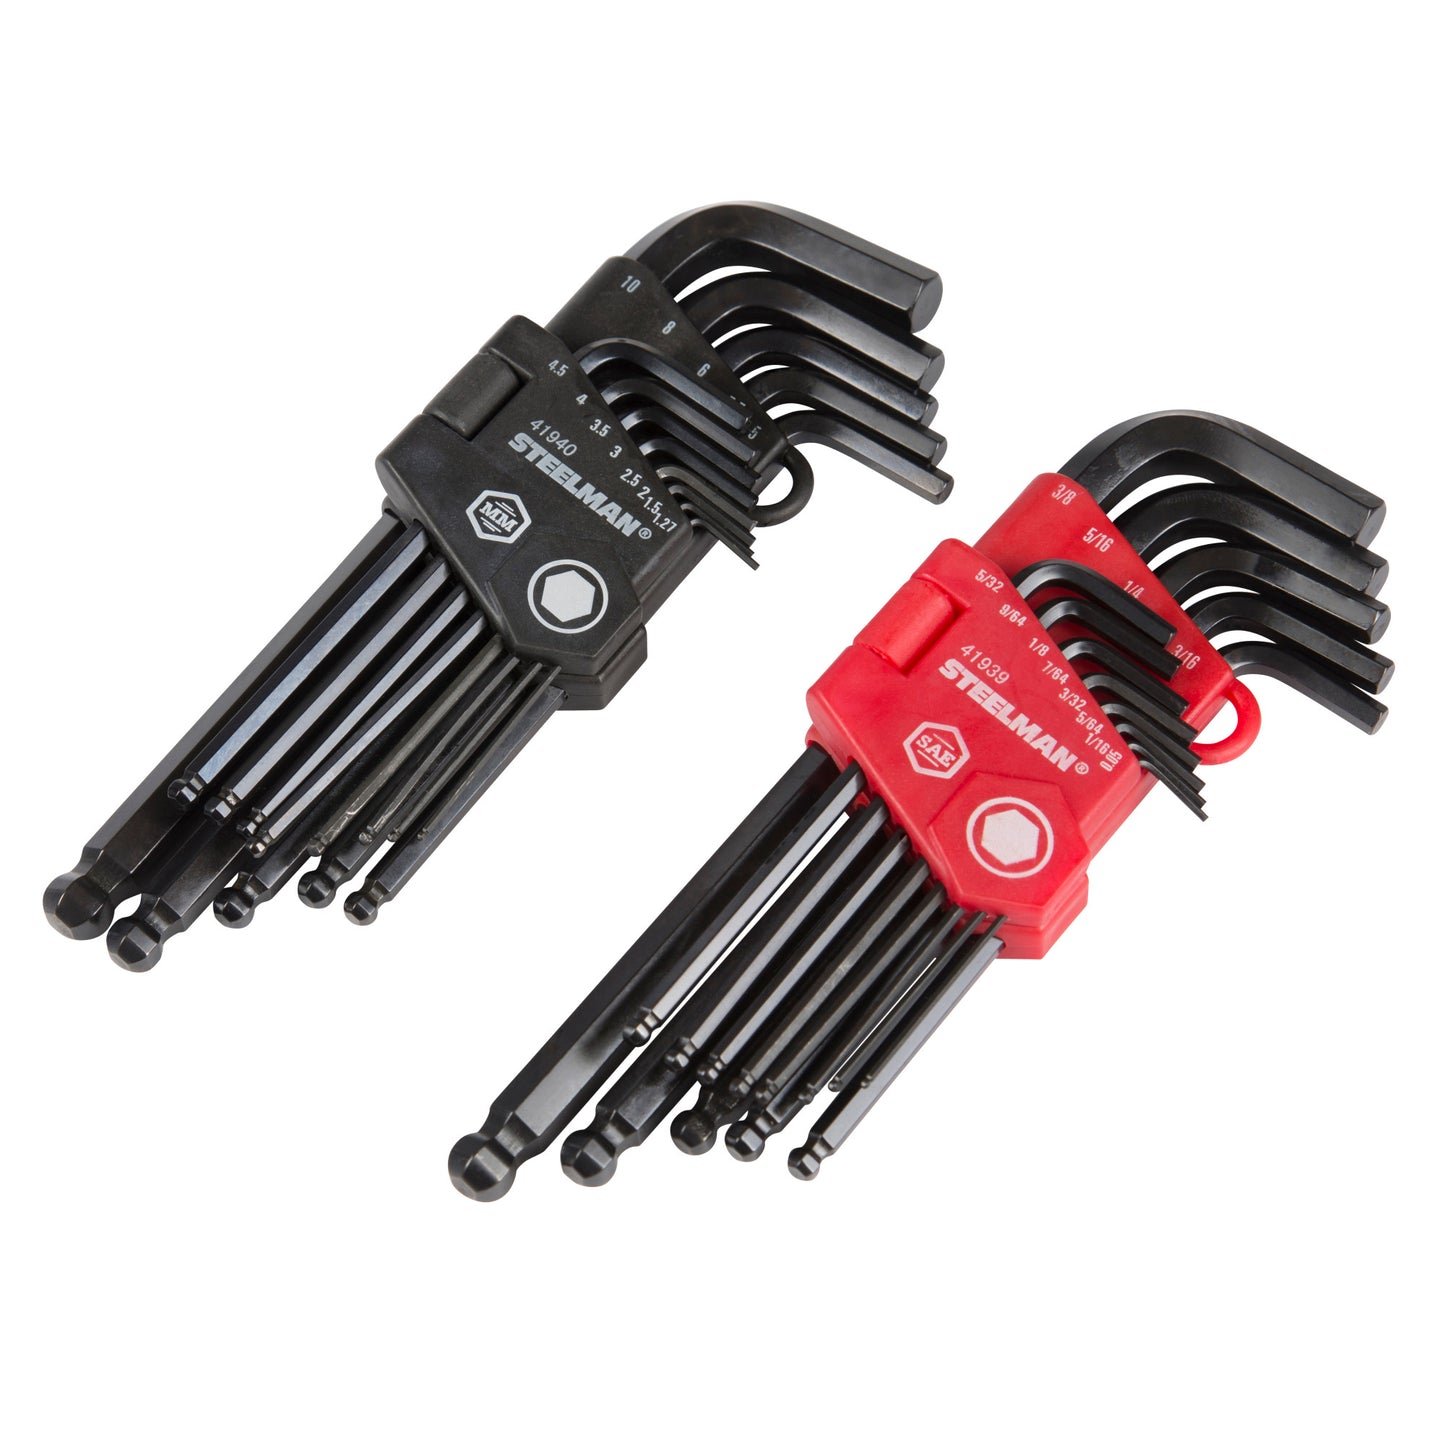 Basics Hex Key Allen Wrench 26 Set with Ball End